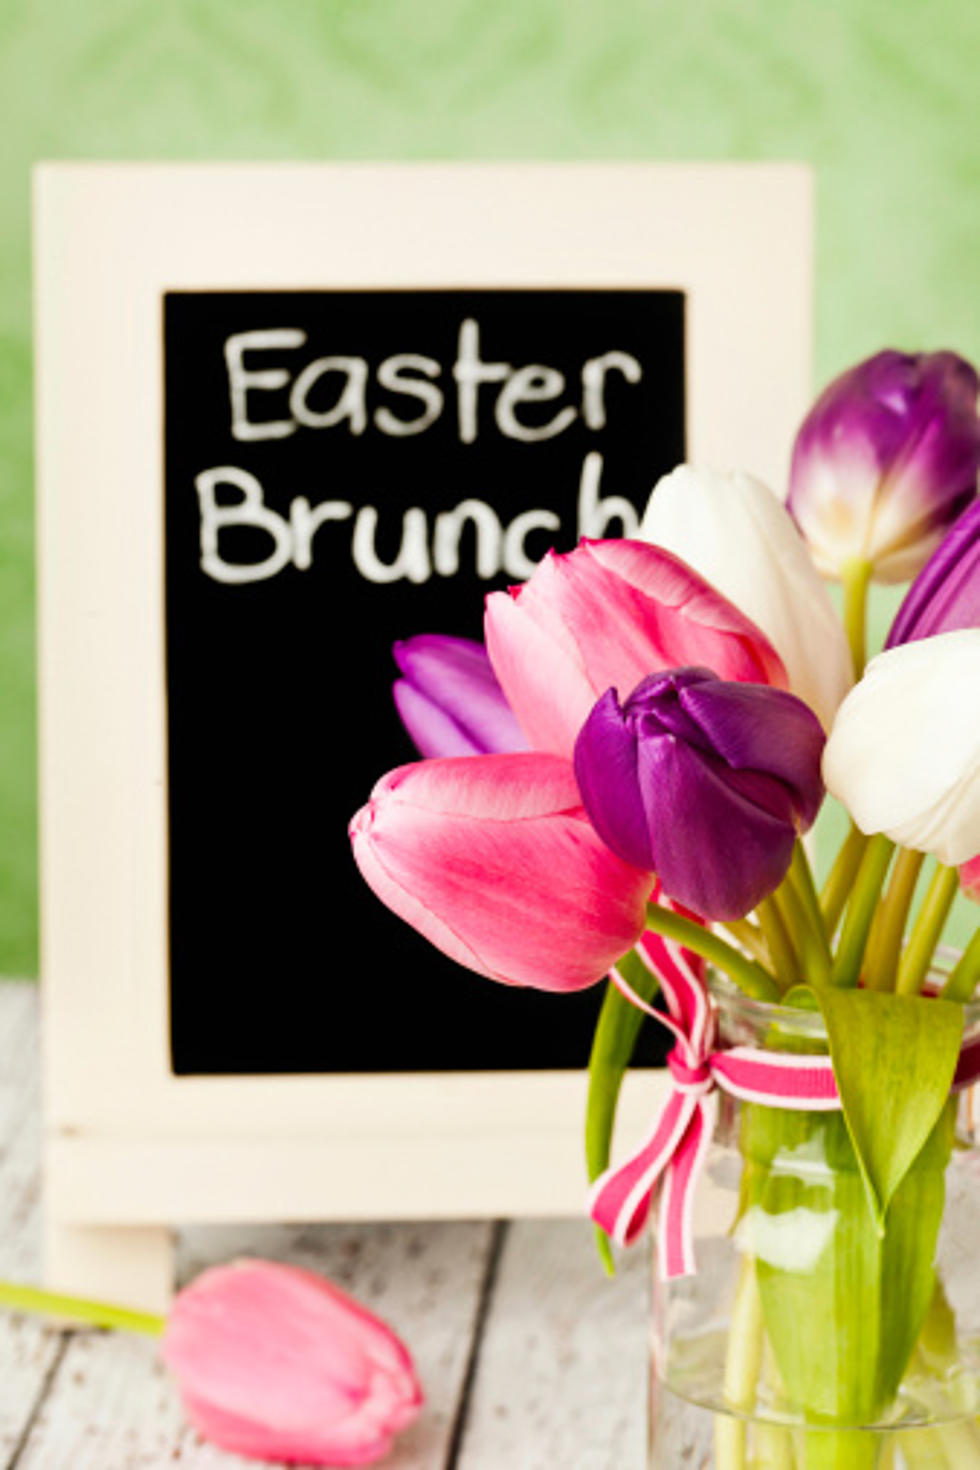 Easter Brunches in WNY